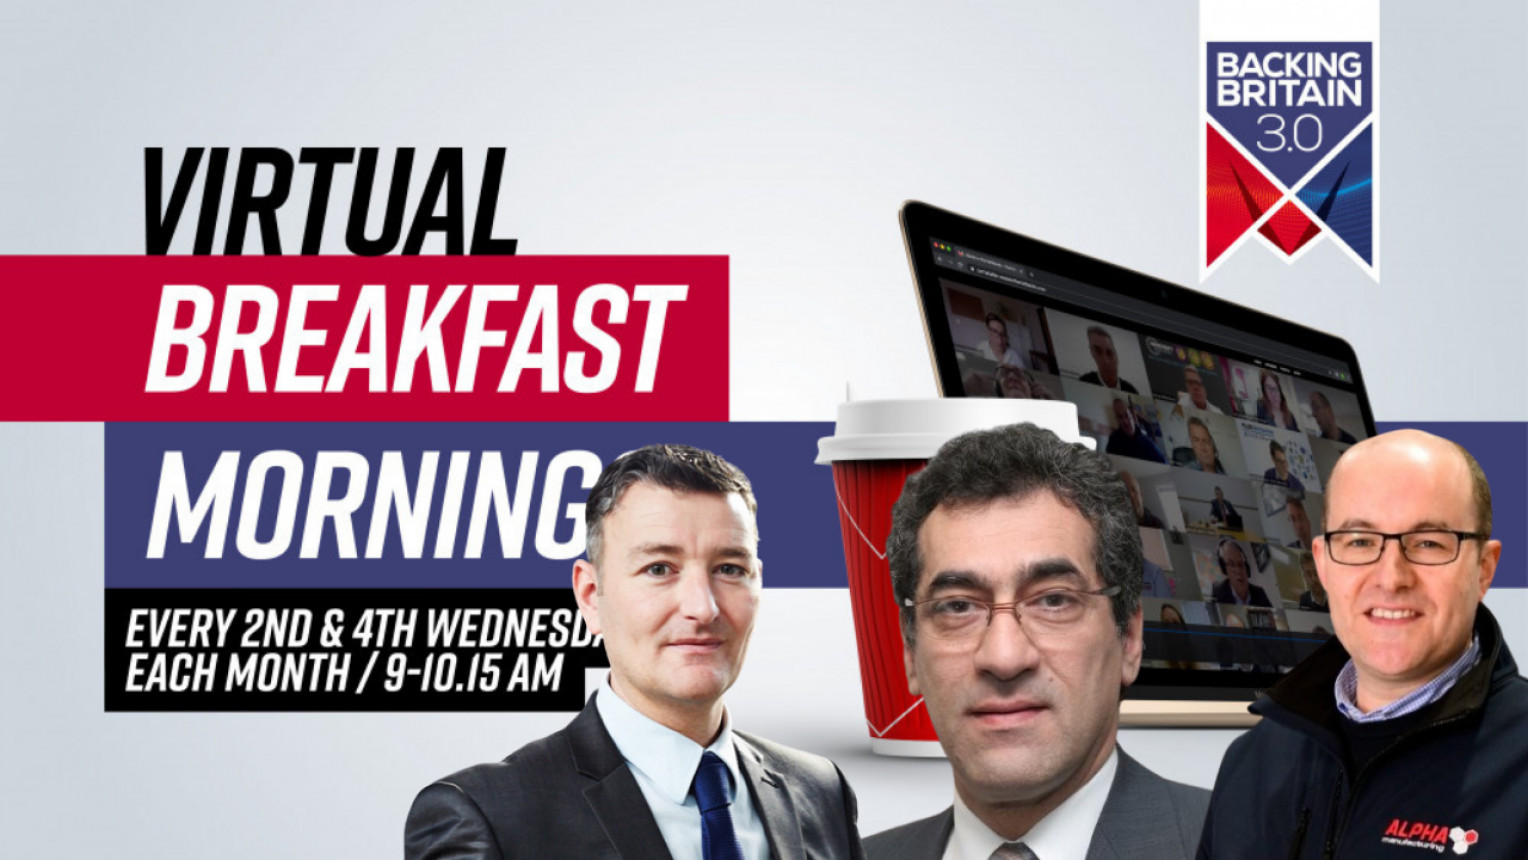 Backing Britain Virtual Breakfast Morning with Crompton Controls, Alpha Manufacturing and Pro Enviro